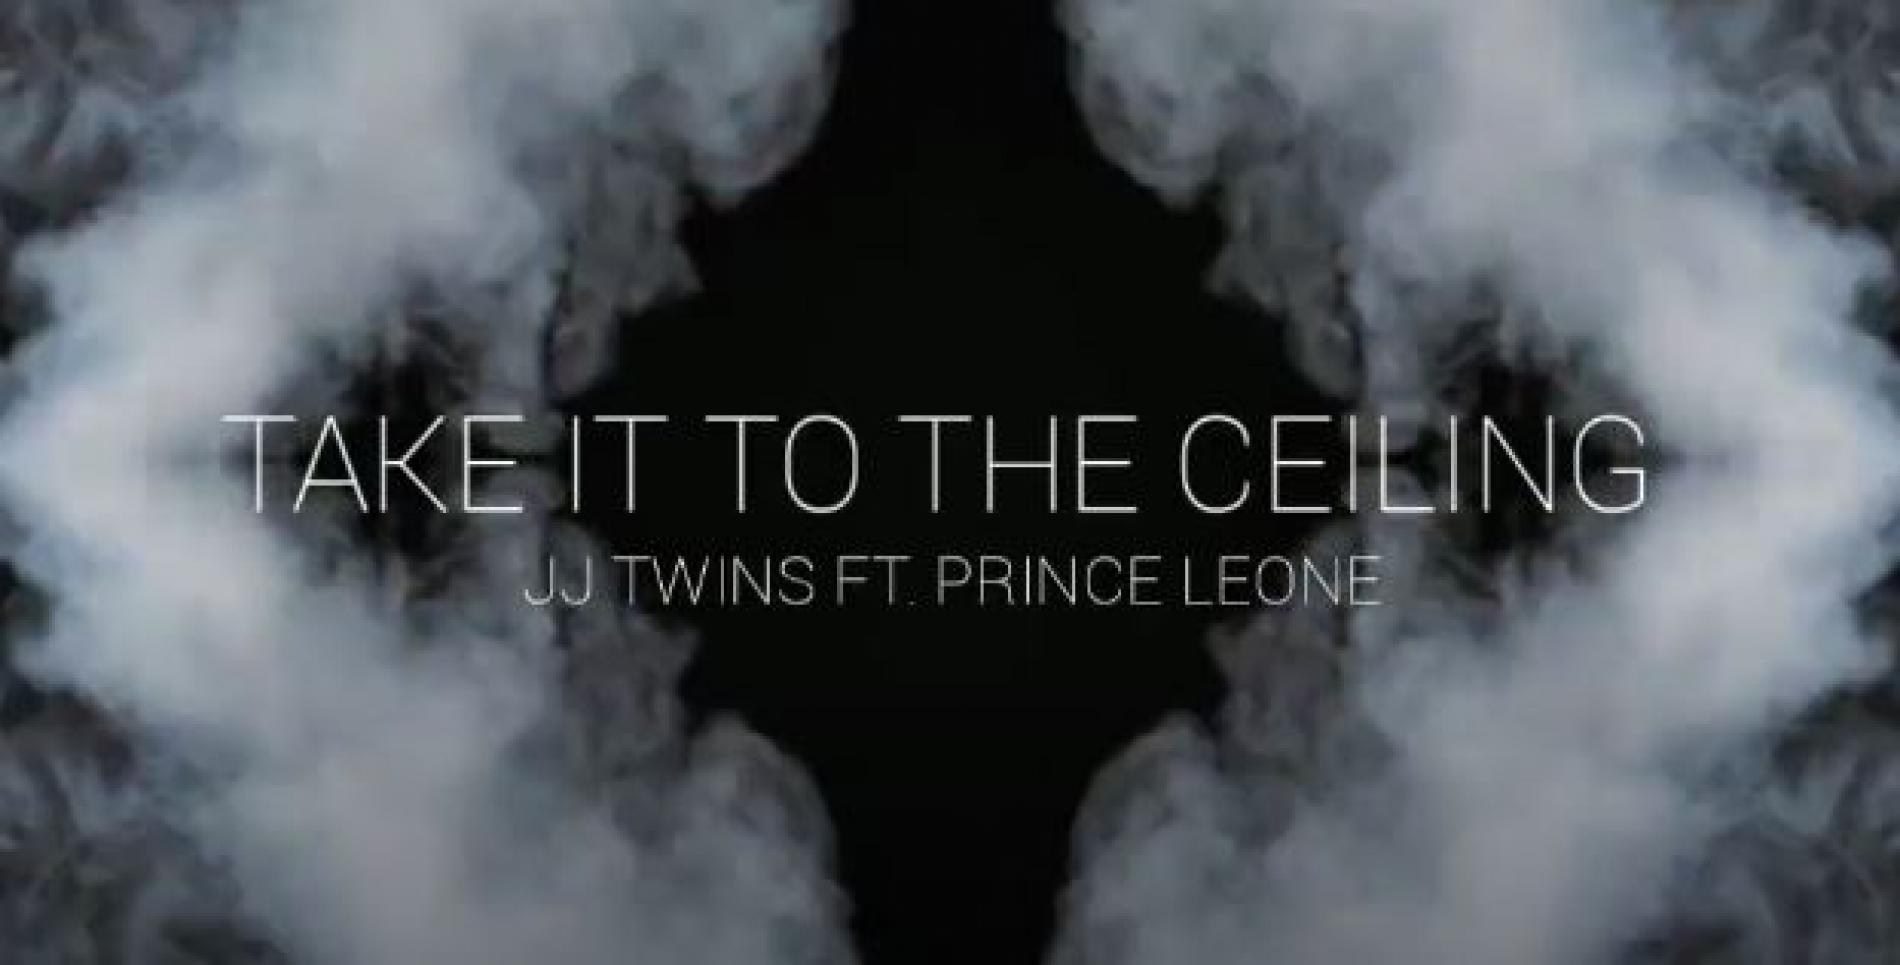 New Music : JJ Twins – Take It To The Ceiling Ft Prince Leone (Visualizer Video)